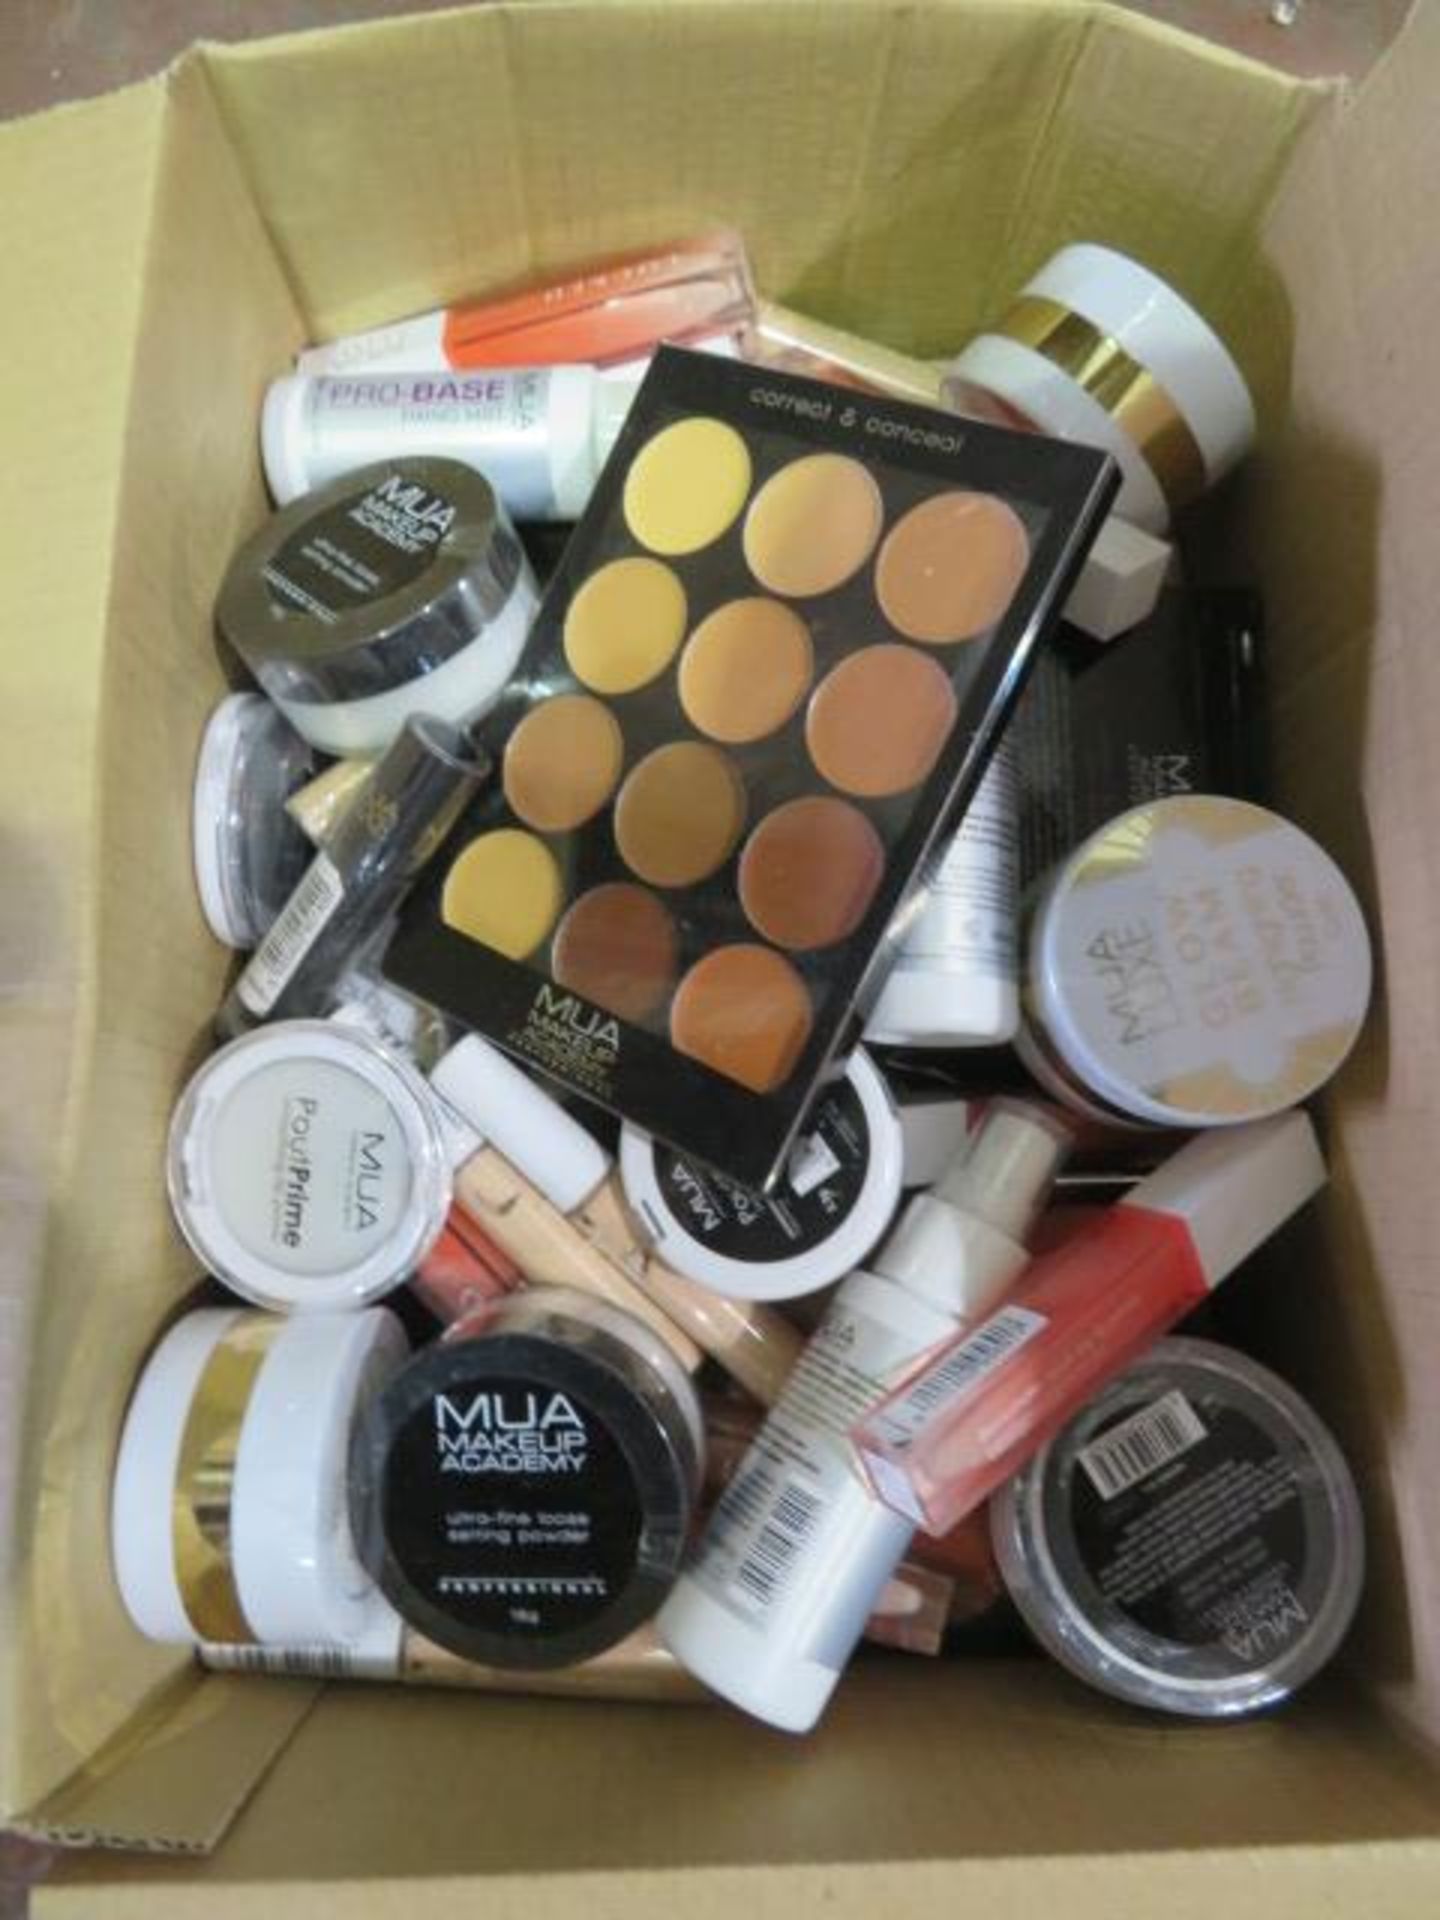 Circa. 200 items of various new make up acadamy make up to include: correct and conceal palette...